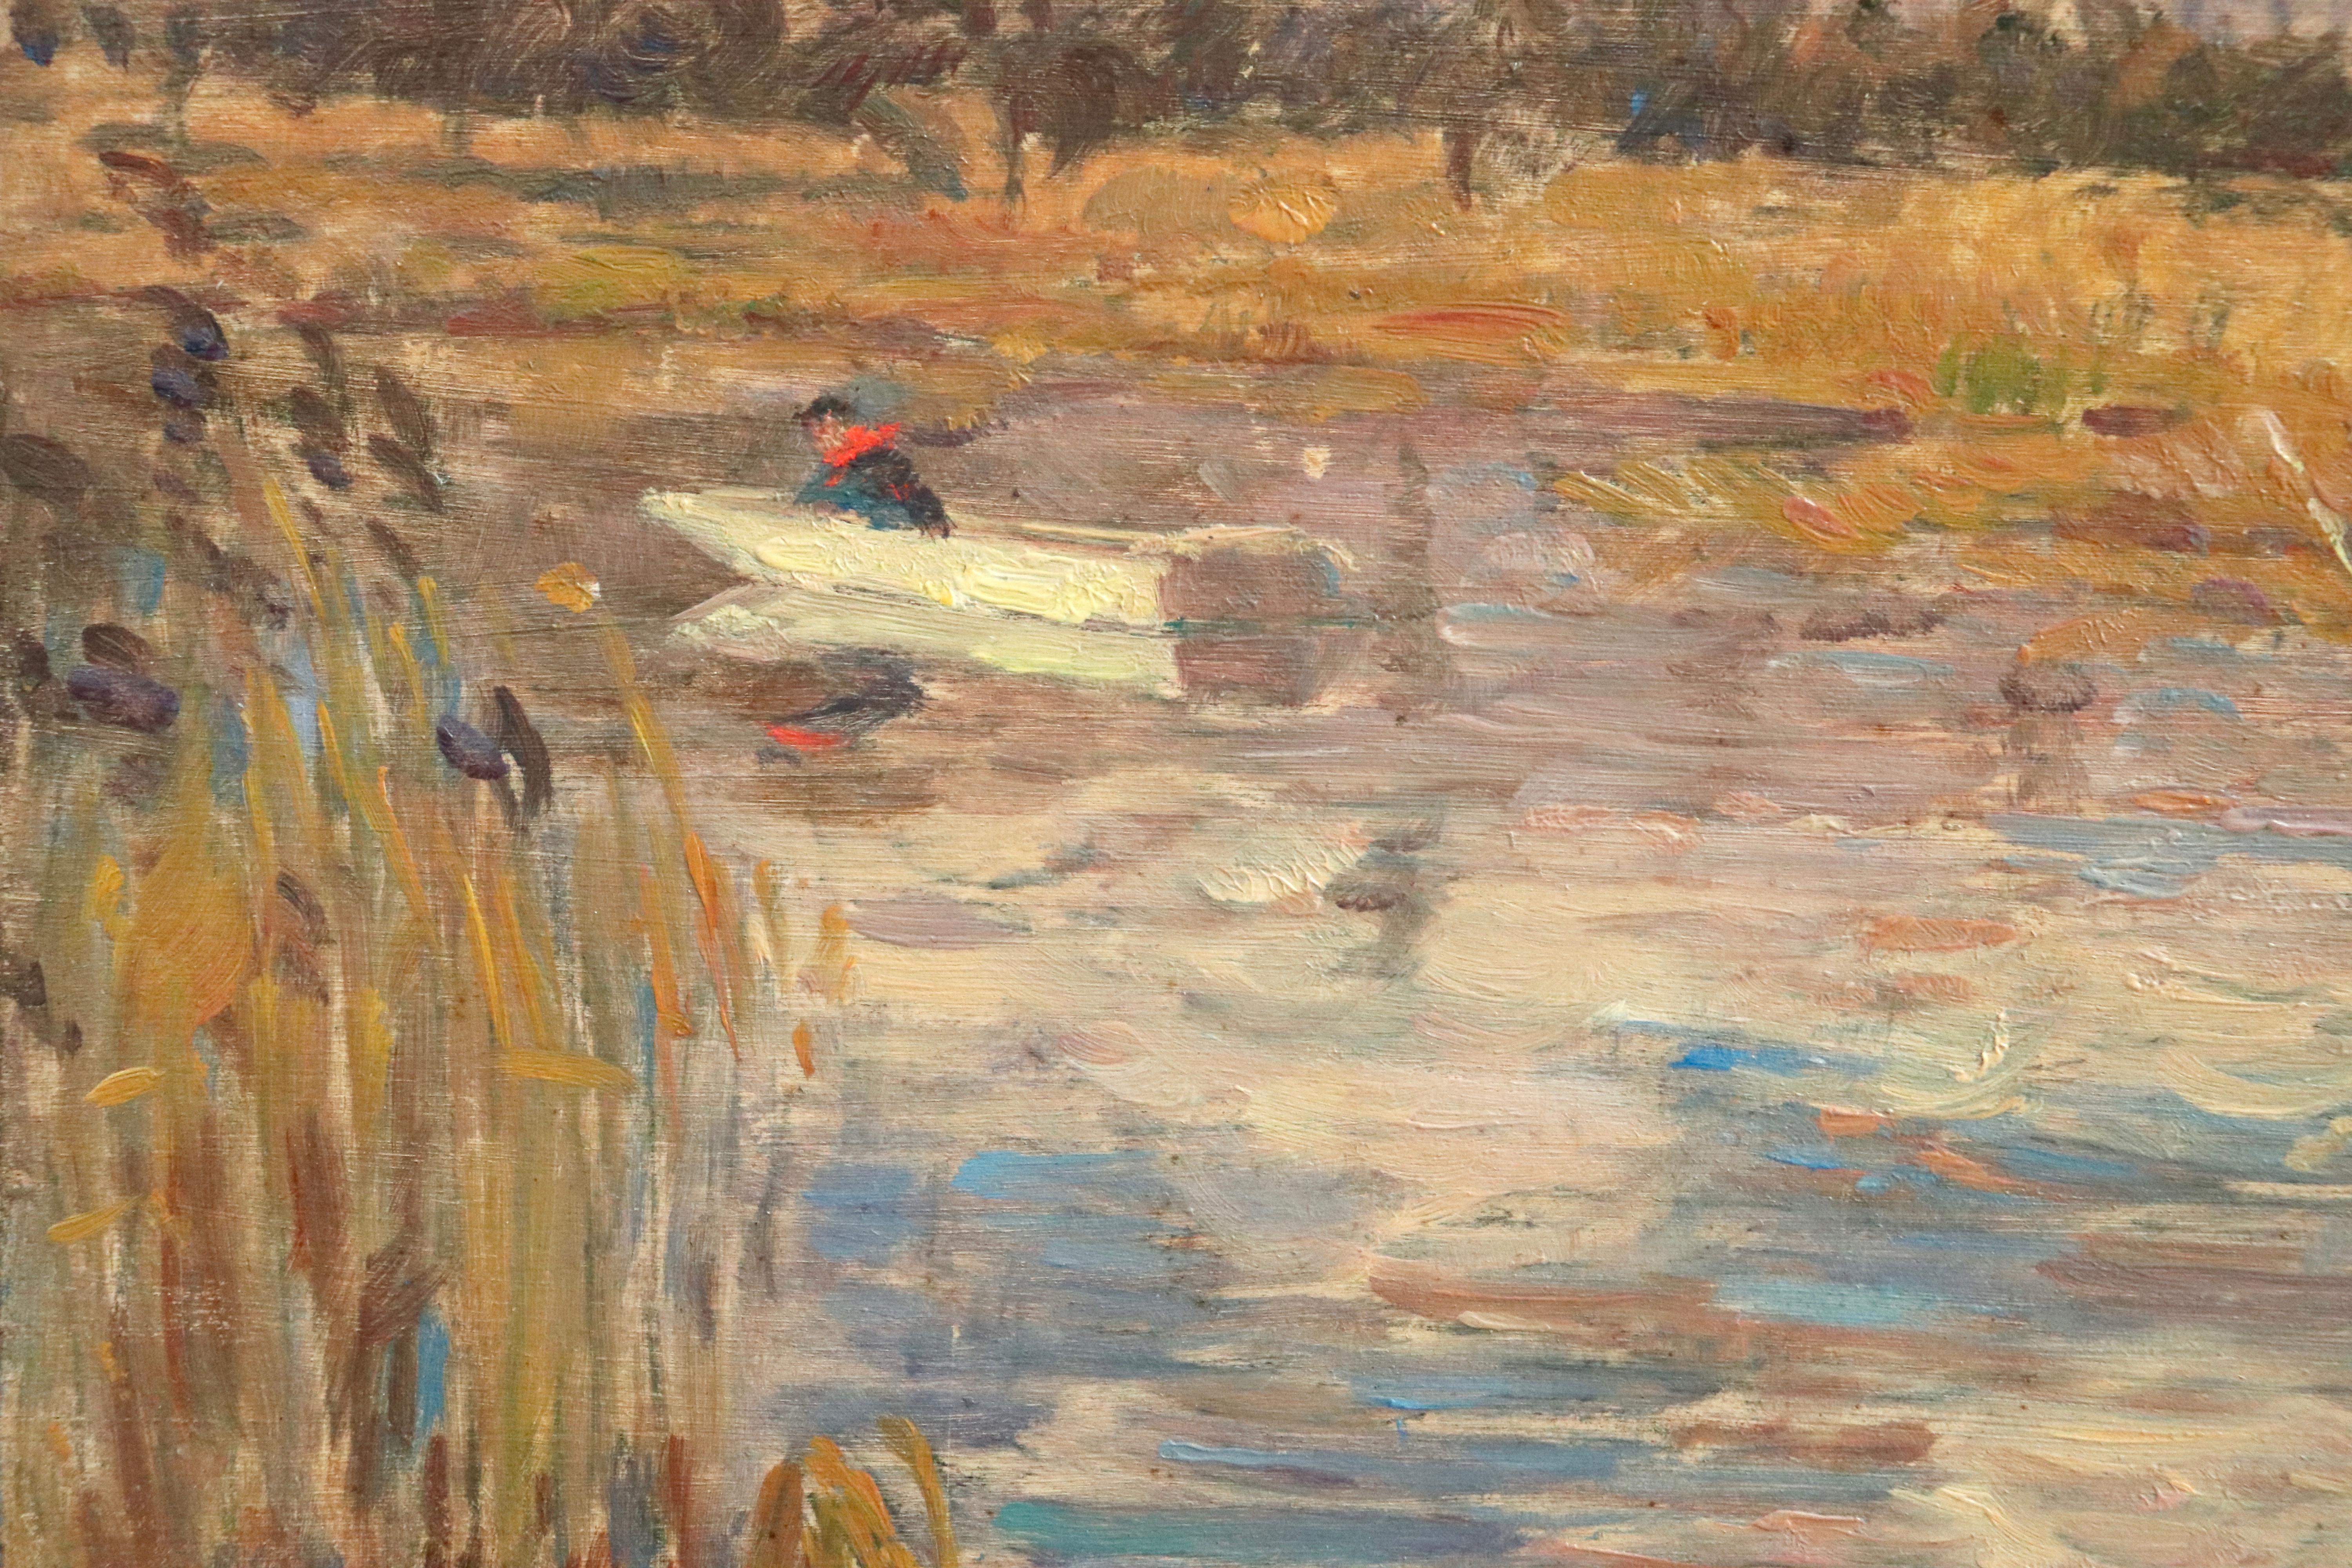 Oil on panel by Henri Duhem depicting a man in a small boat on a pond in a French landscape on a fresh spring's day. Signed lower left and dated 1910 verso. This painting is not currently framed but a suitable frame can be sourced if